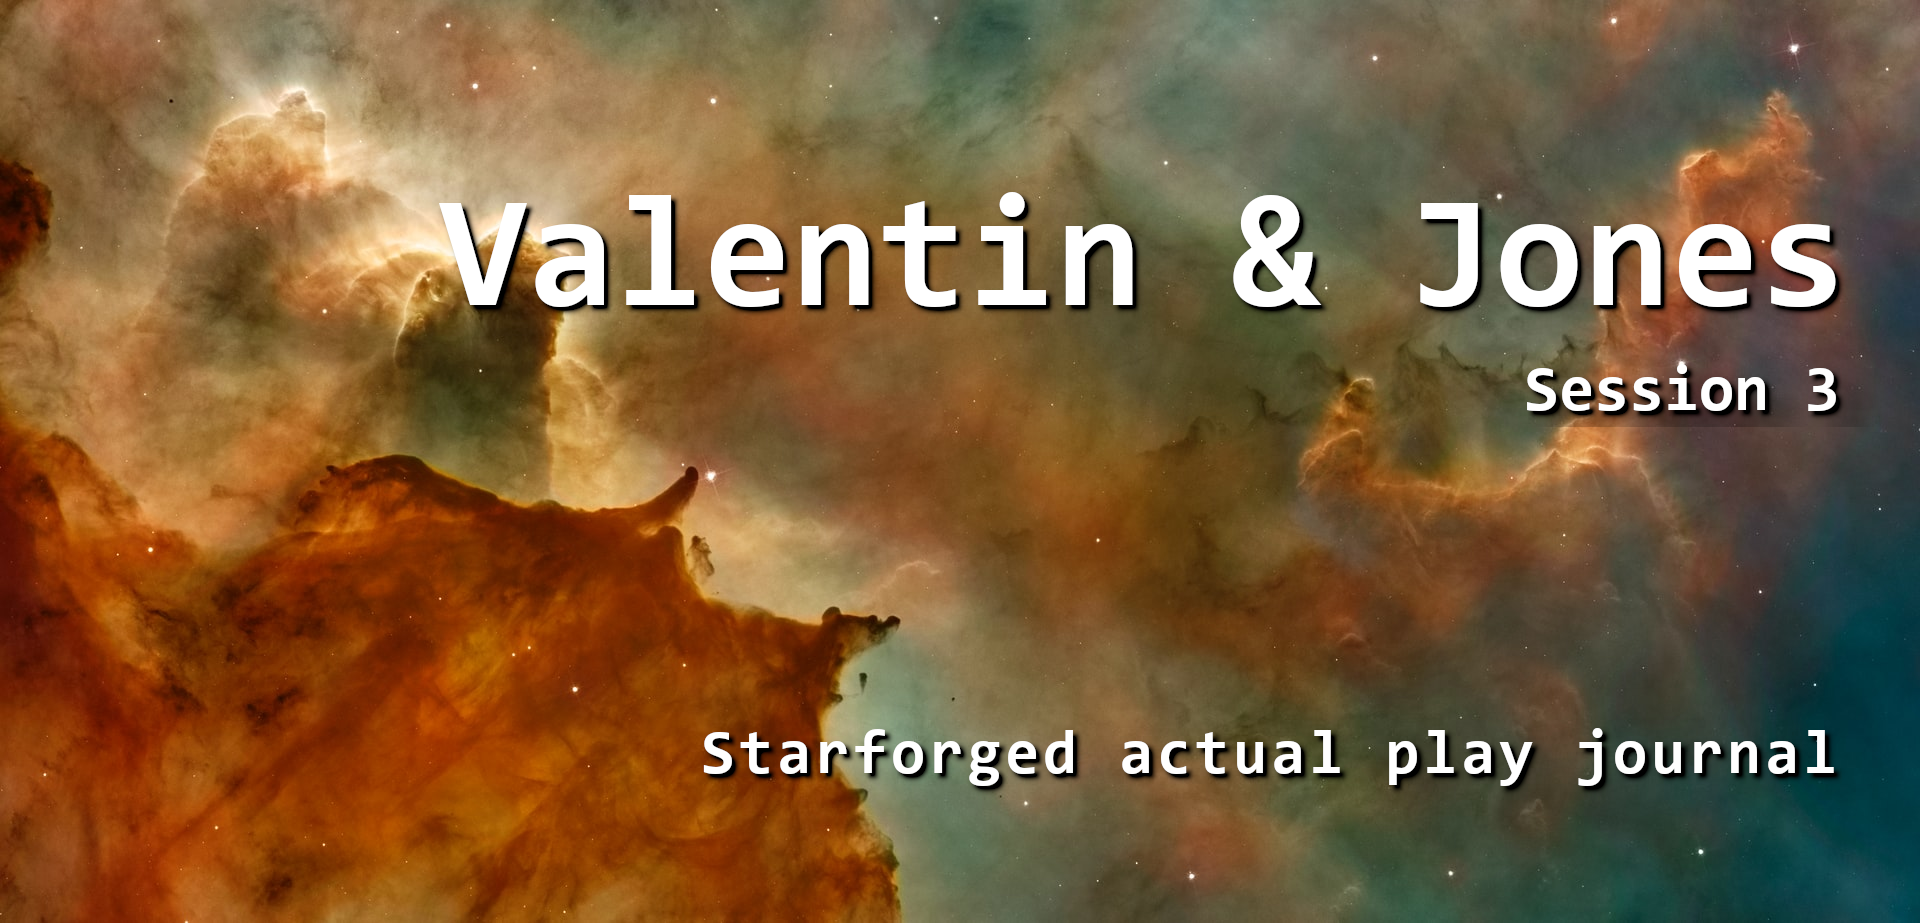 Valentin & Jones, Session 3, Starforged actual play journal